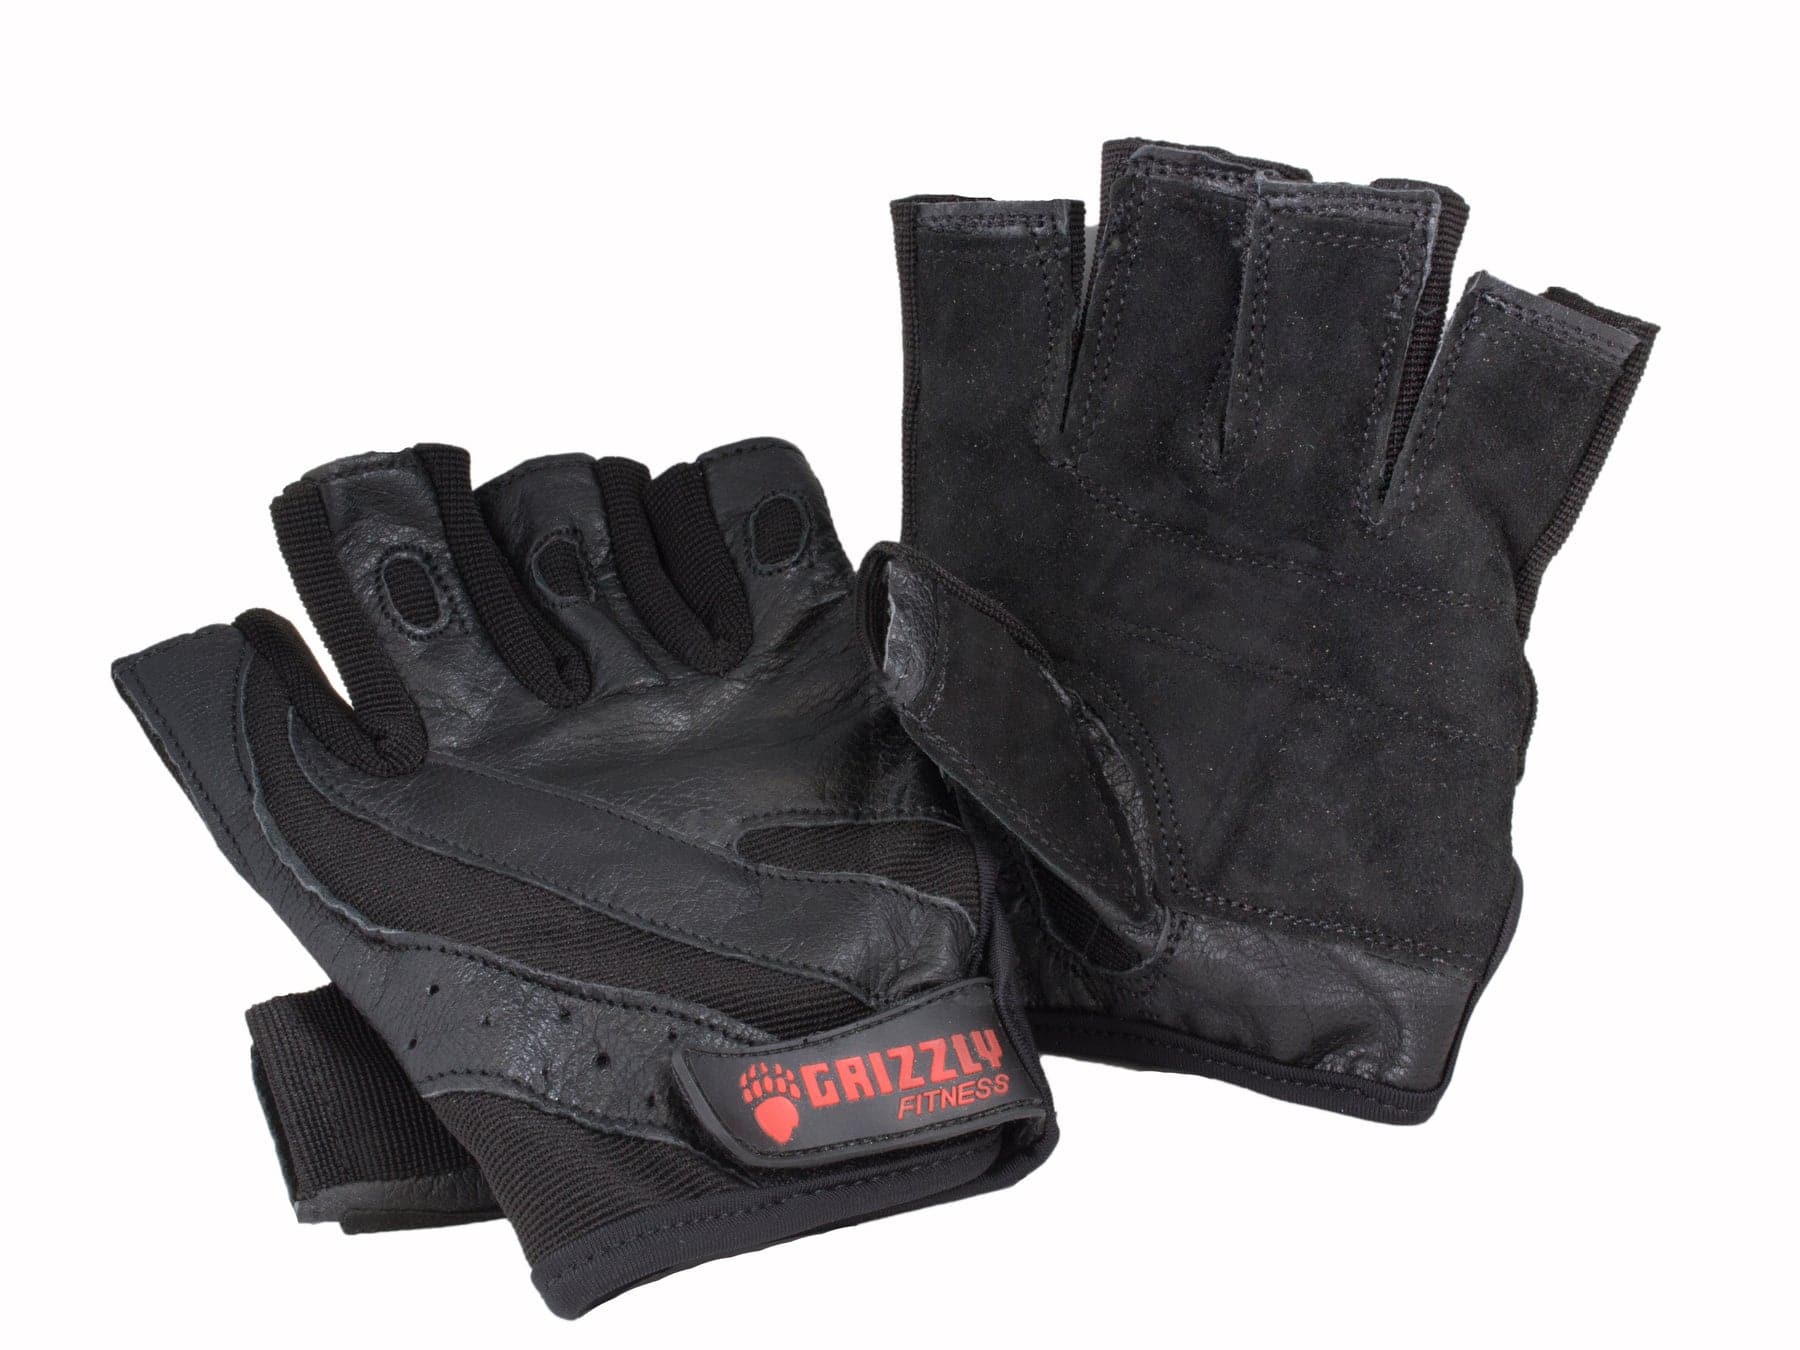 Grizzly Fitness Voltage Lifting and Training Gloves | Men and Women Sizes | Extra Durable and Flexible